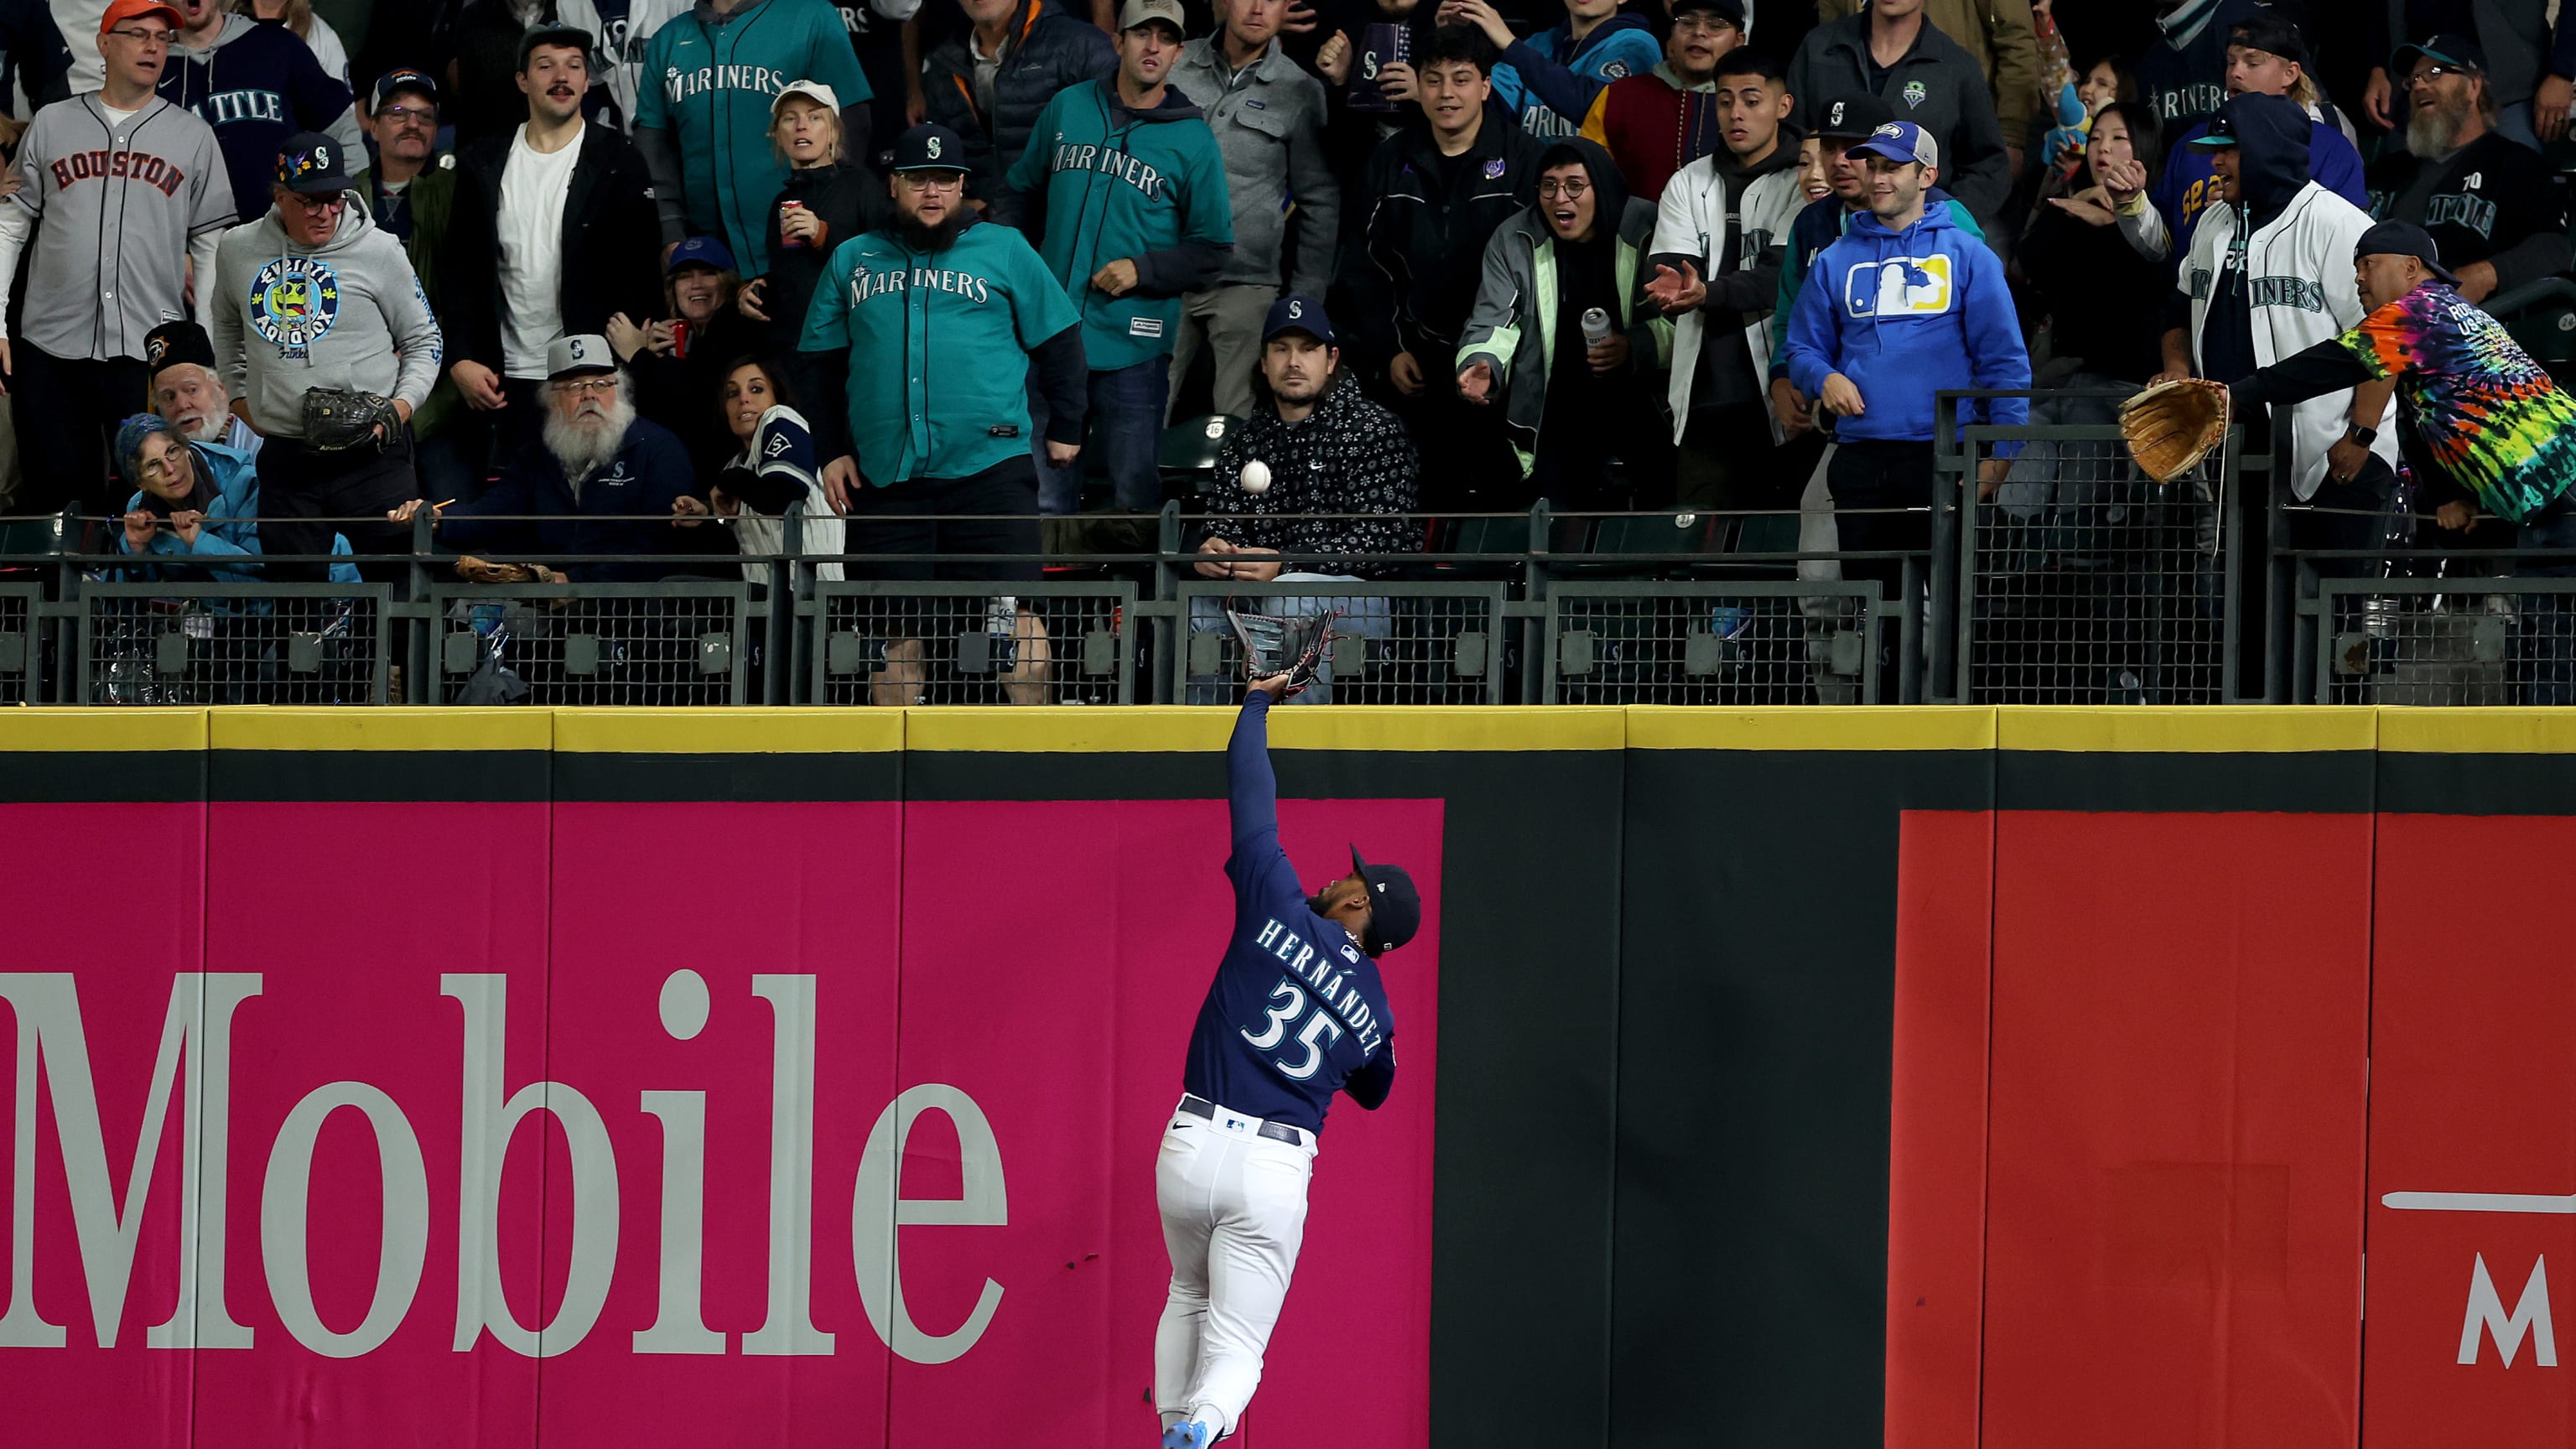 Mariners find themselves in rare spot heading into September: first place